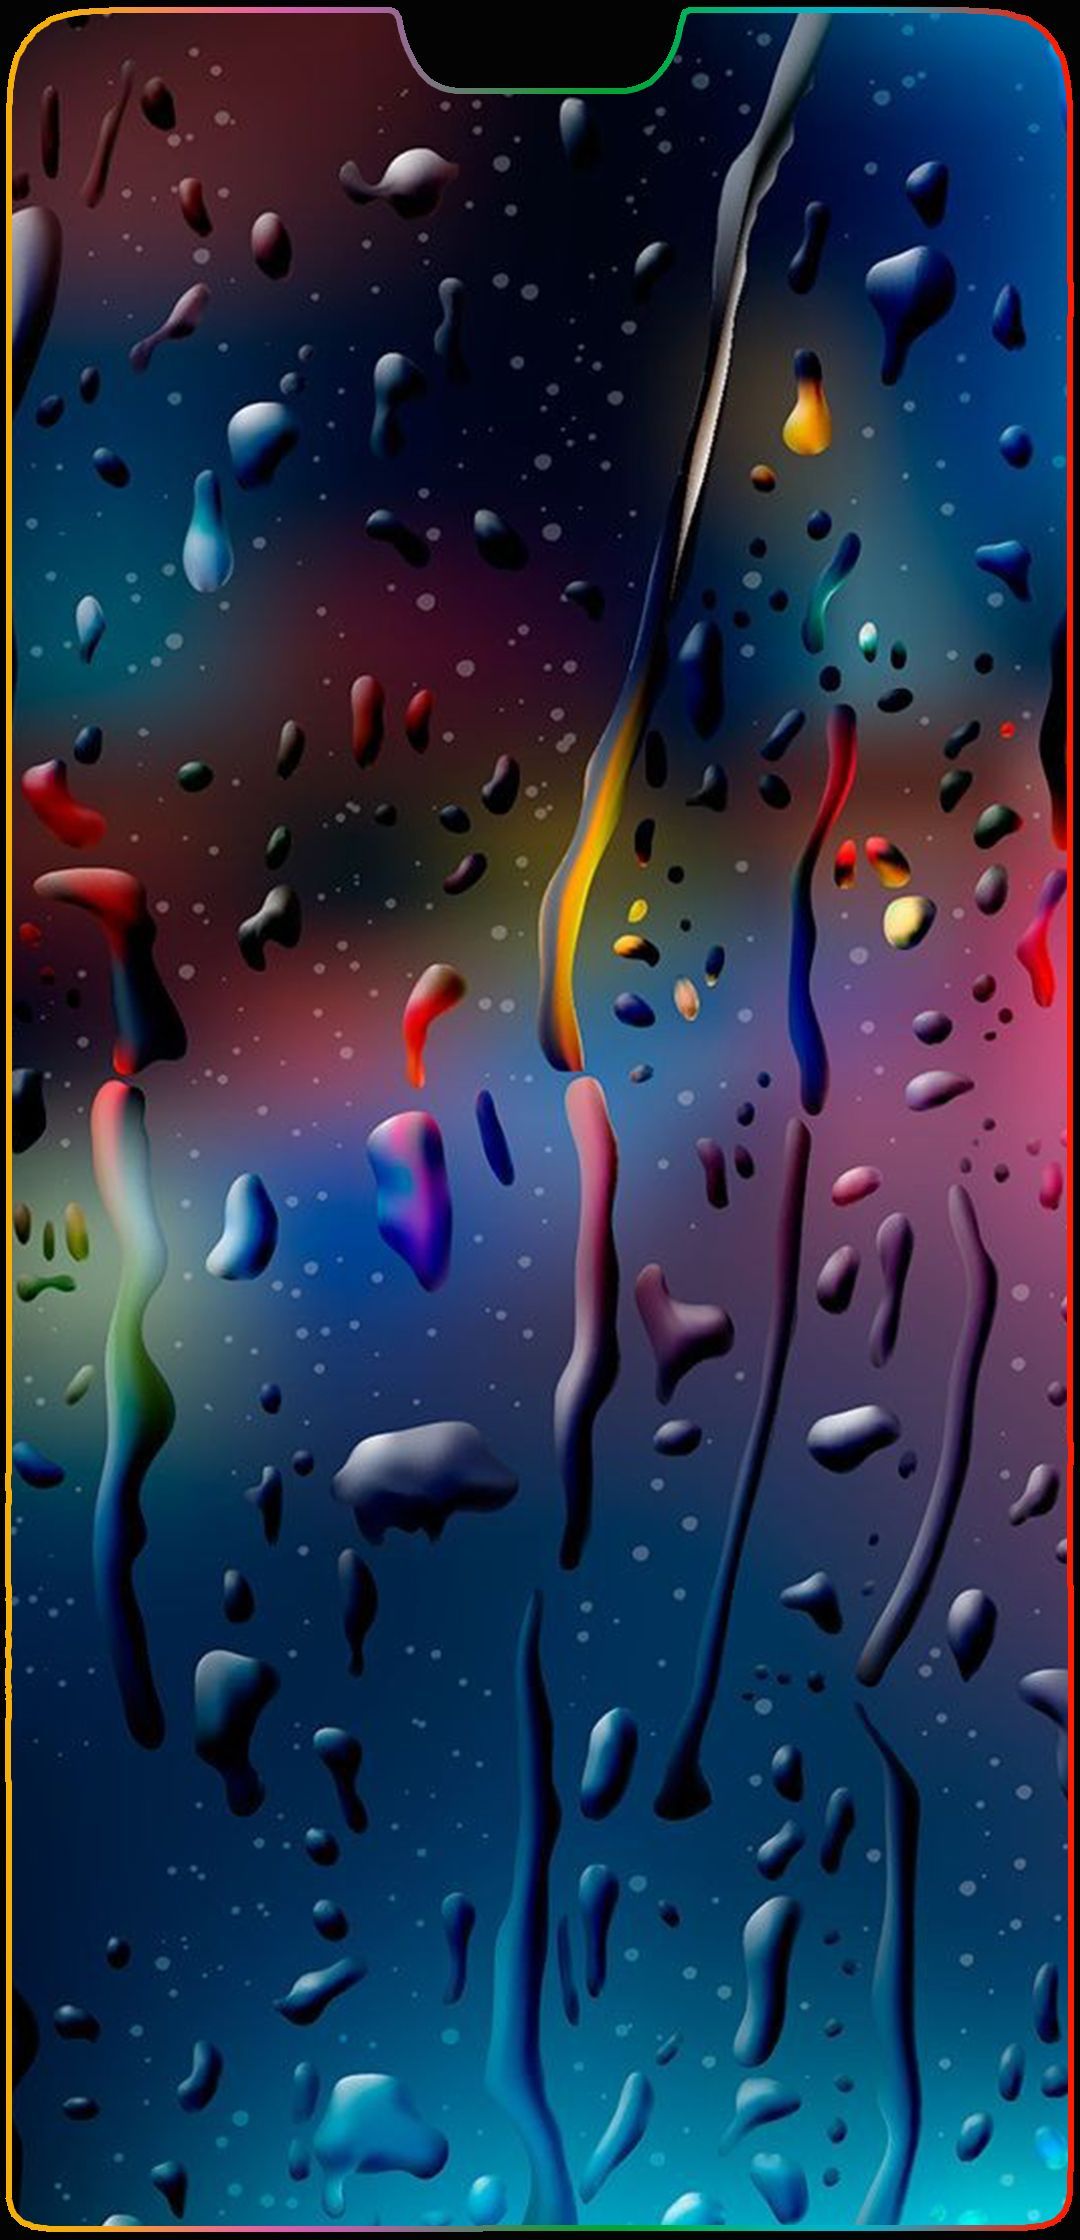 Free download Rain p20 pro Huawei P20 Notch Wallpaper in 2019 iPhone [1080x2240] for your Desktop, Mobile & Tablet. Explore Drop Notch Wallpaper. Drop Notch Wallpaper, PUBG Drop Wallpaper, Water Drop Wallpaper